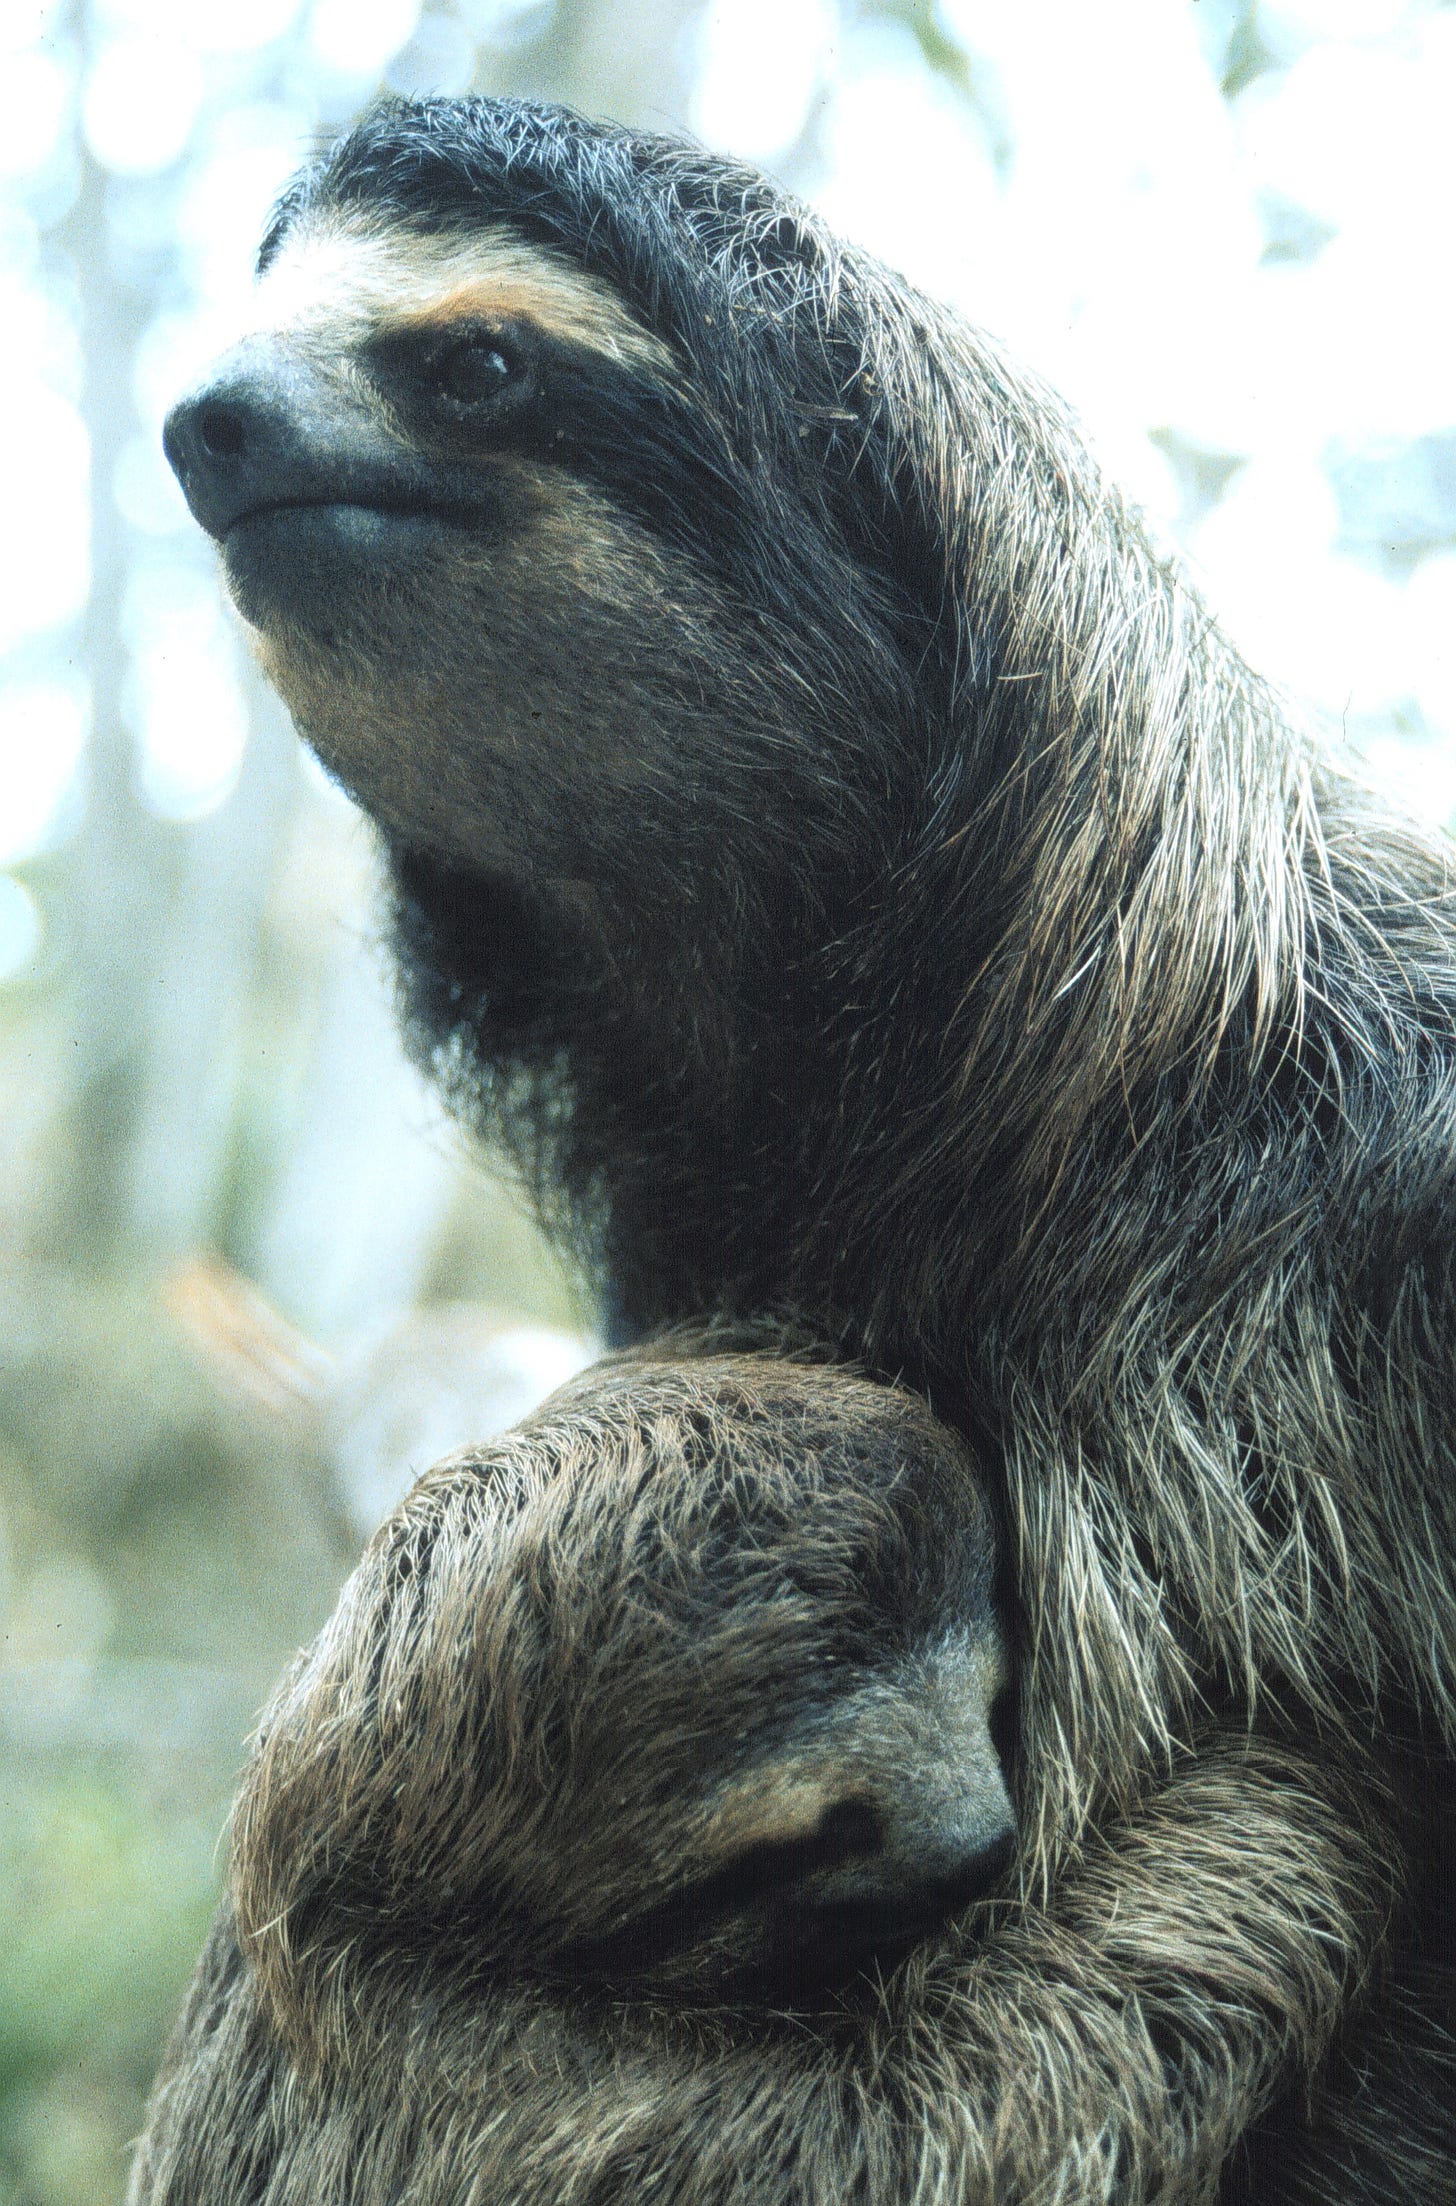 Sloth Mom and baby on BCI. Photo by Heather Heying, 1998.